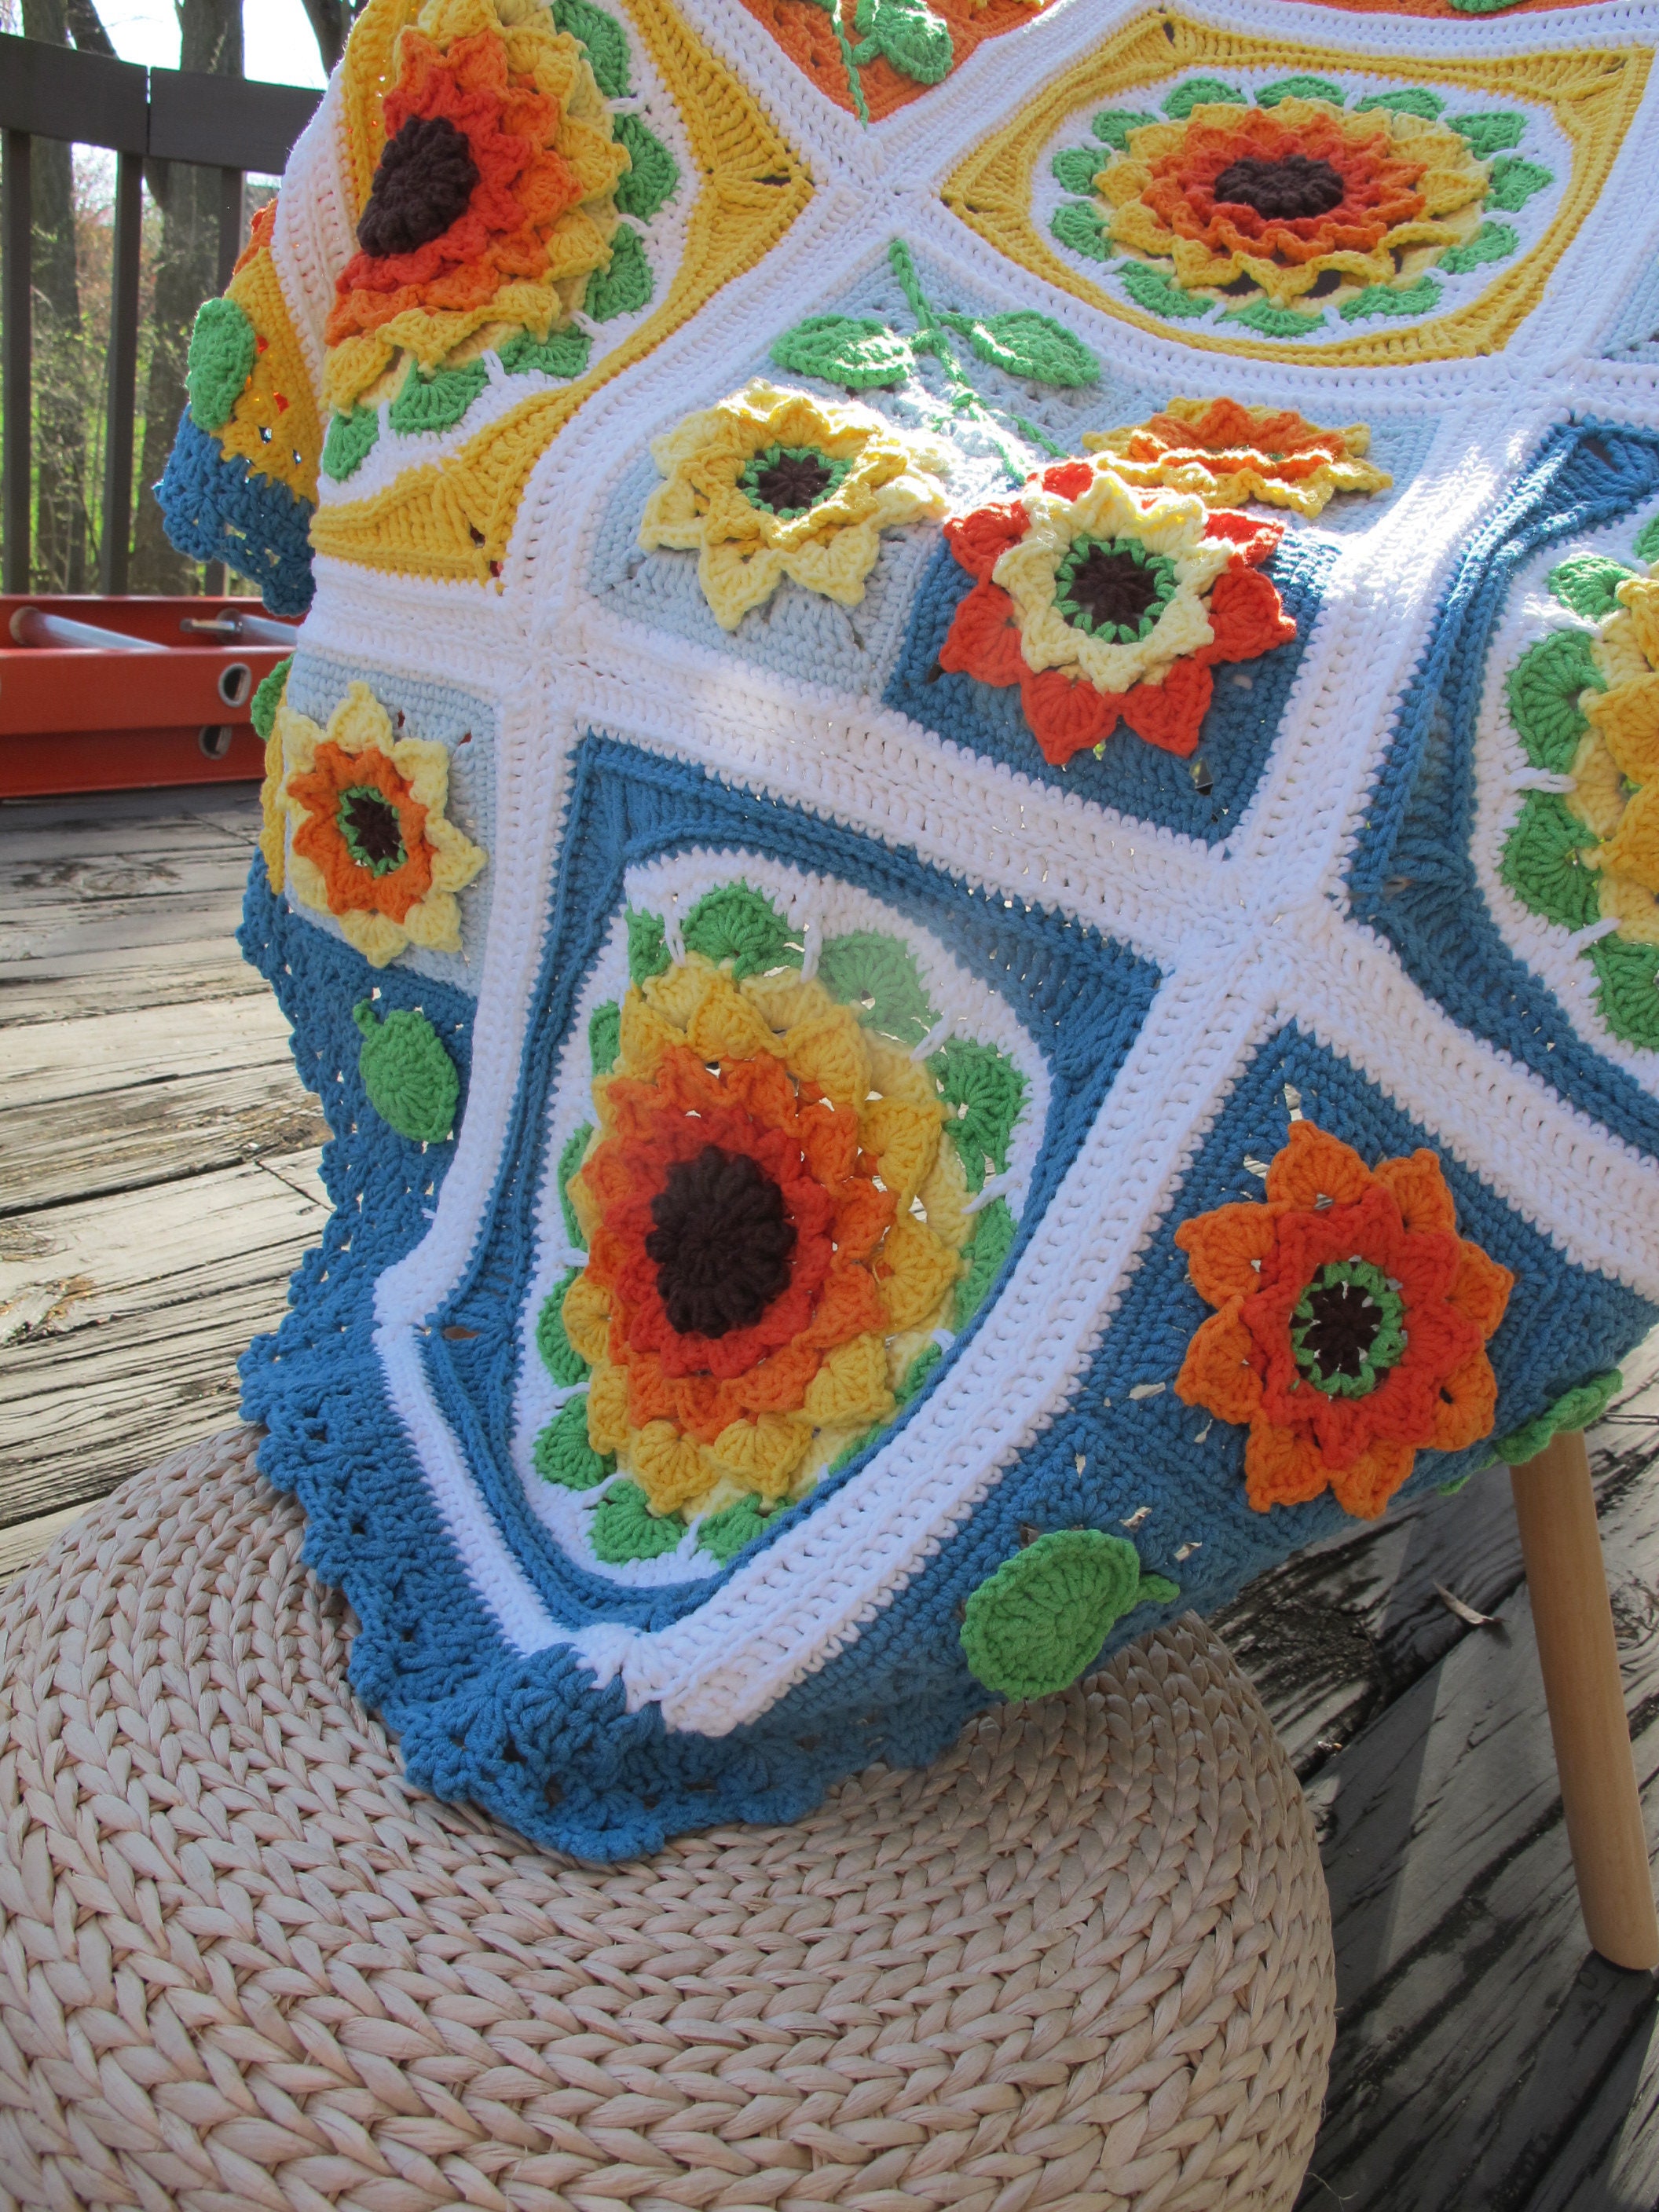 Blanket Crochet Kit for Beginners. Granny Square Crochet Throw. Catalonia  Granny Squares Blanket Crochet Kit by Wool Couture. 